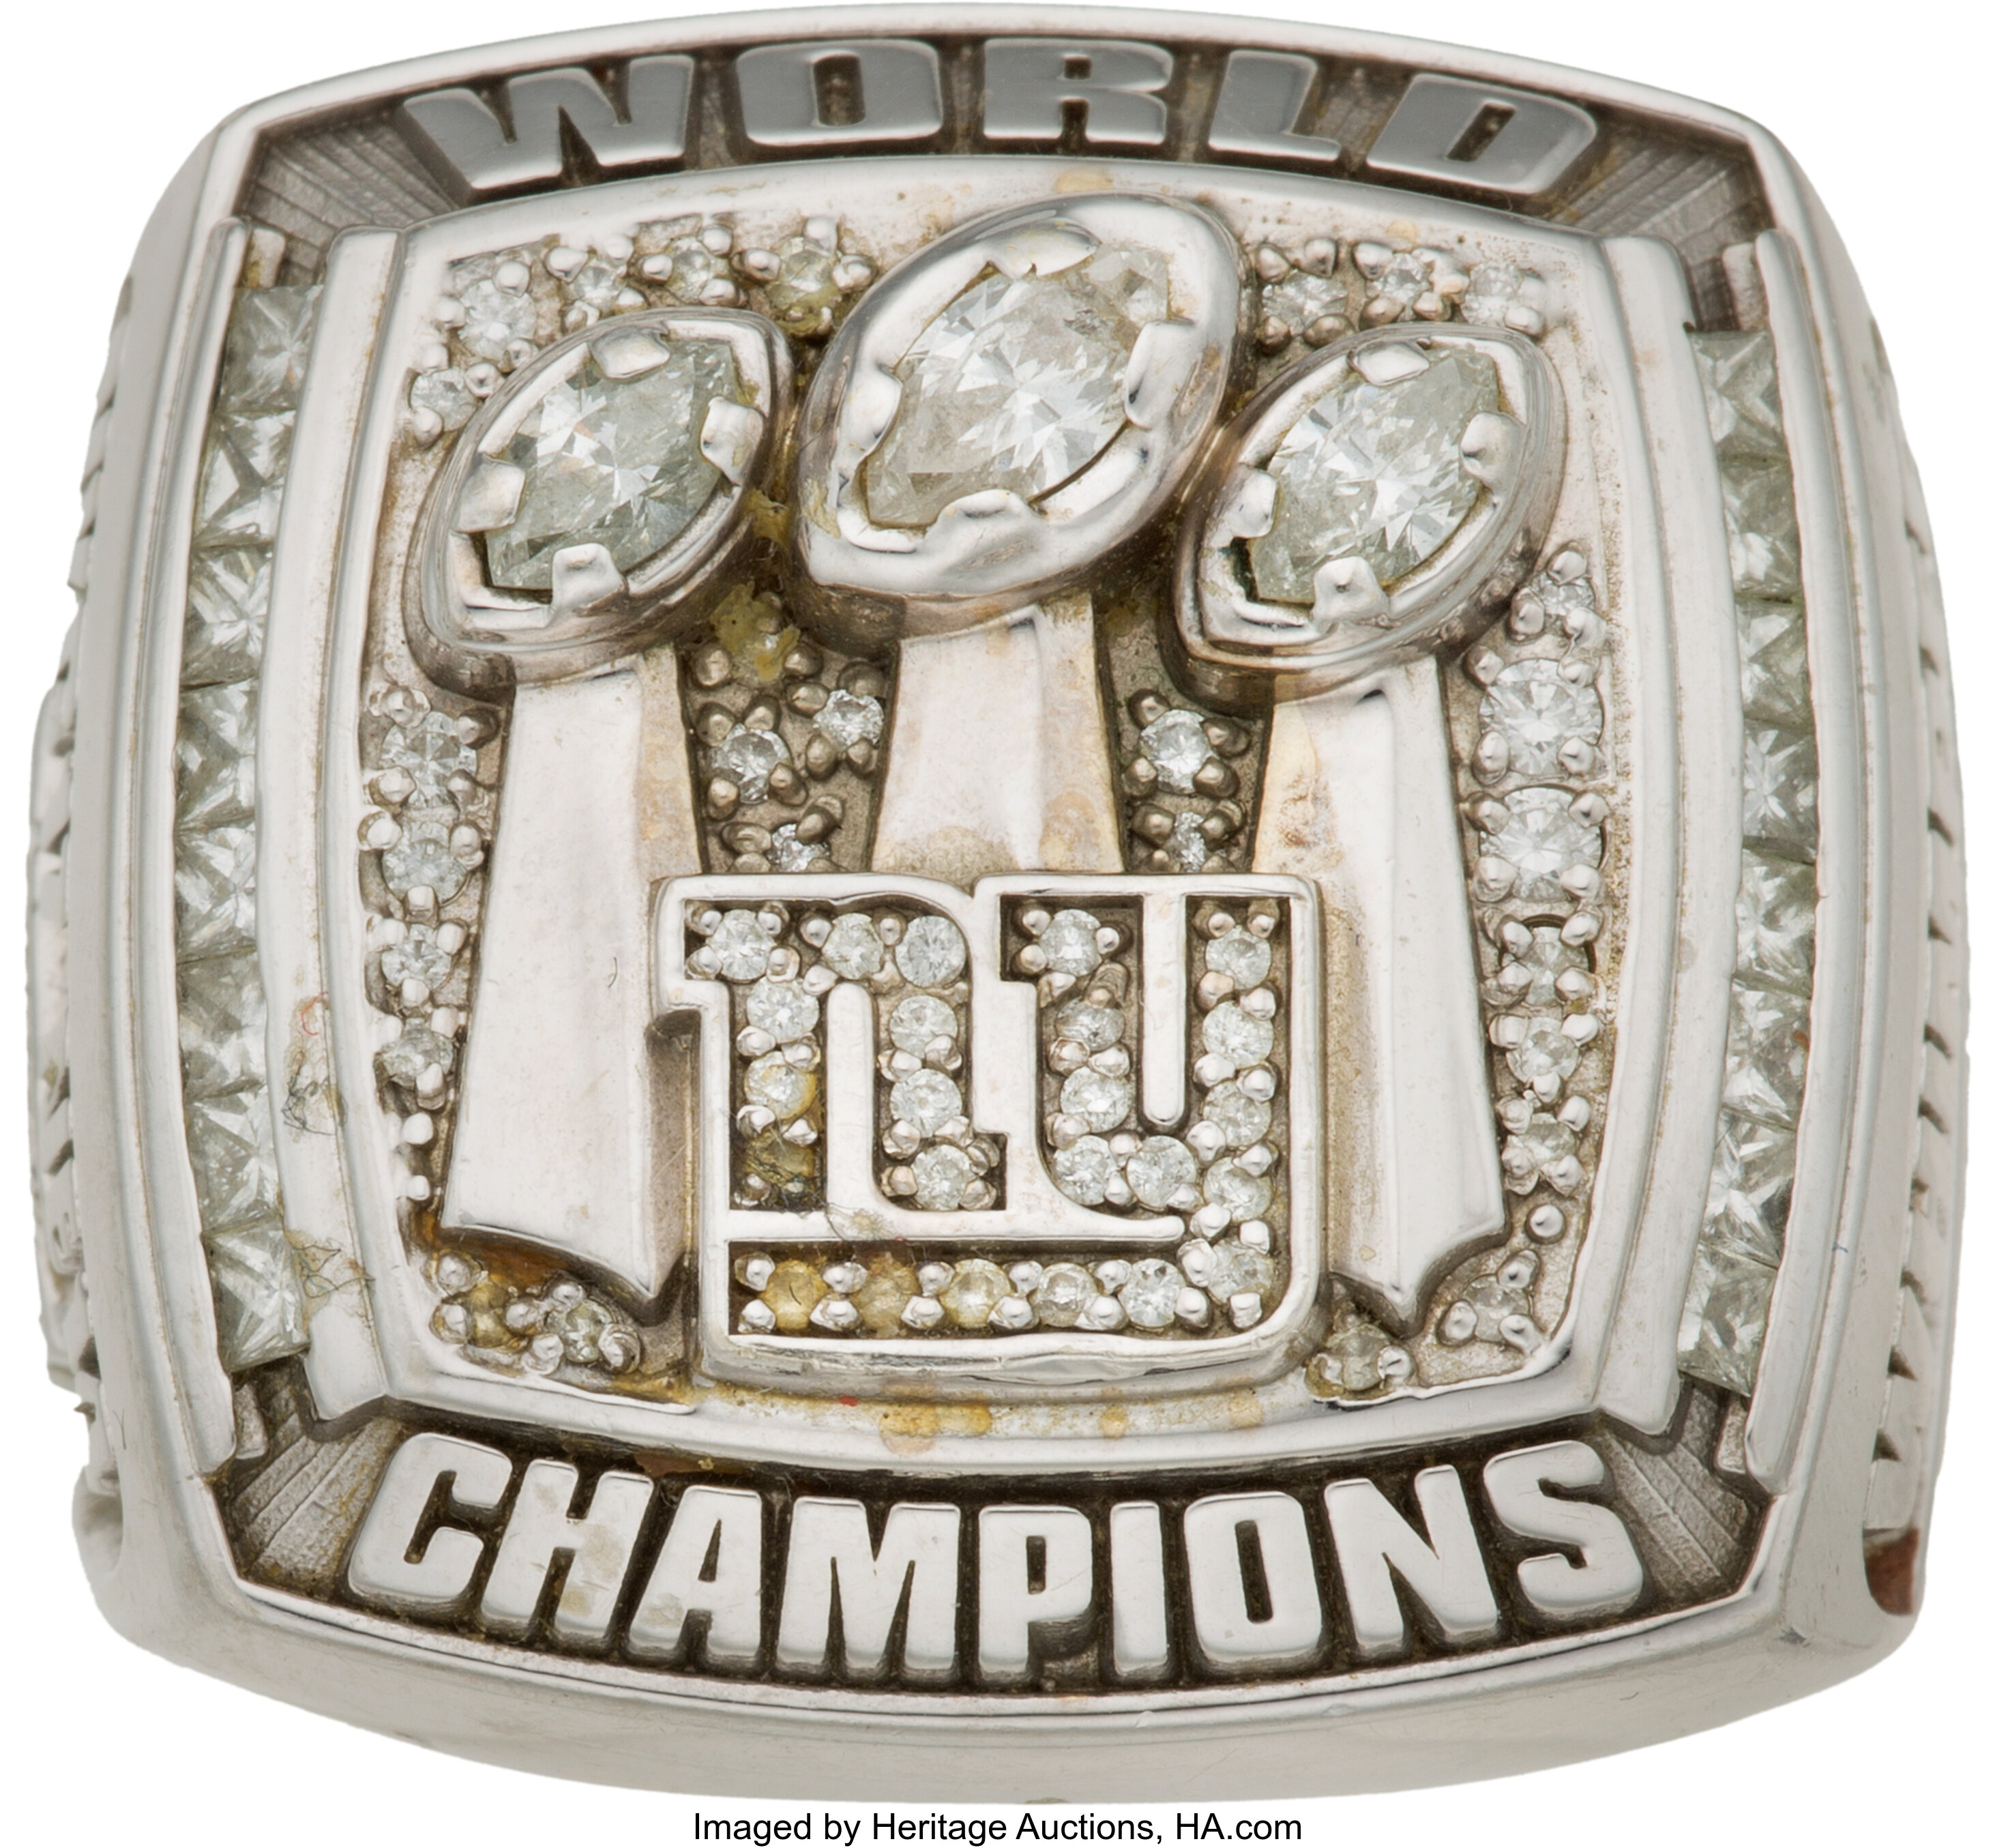 Giants planning a ring worthy of a champion